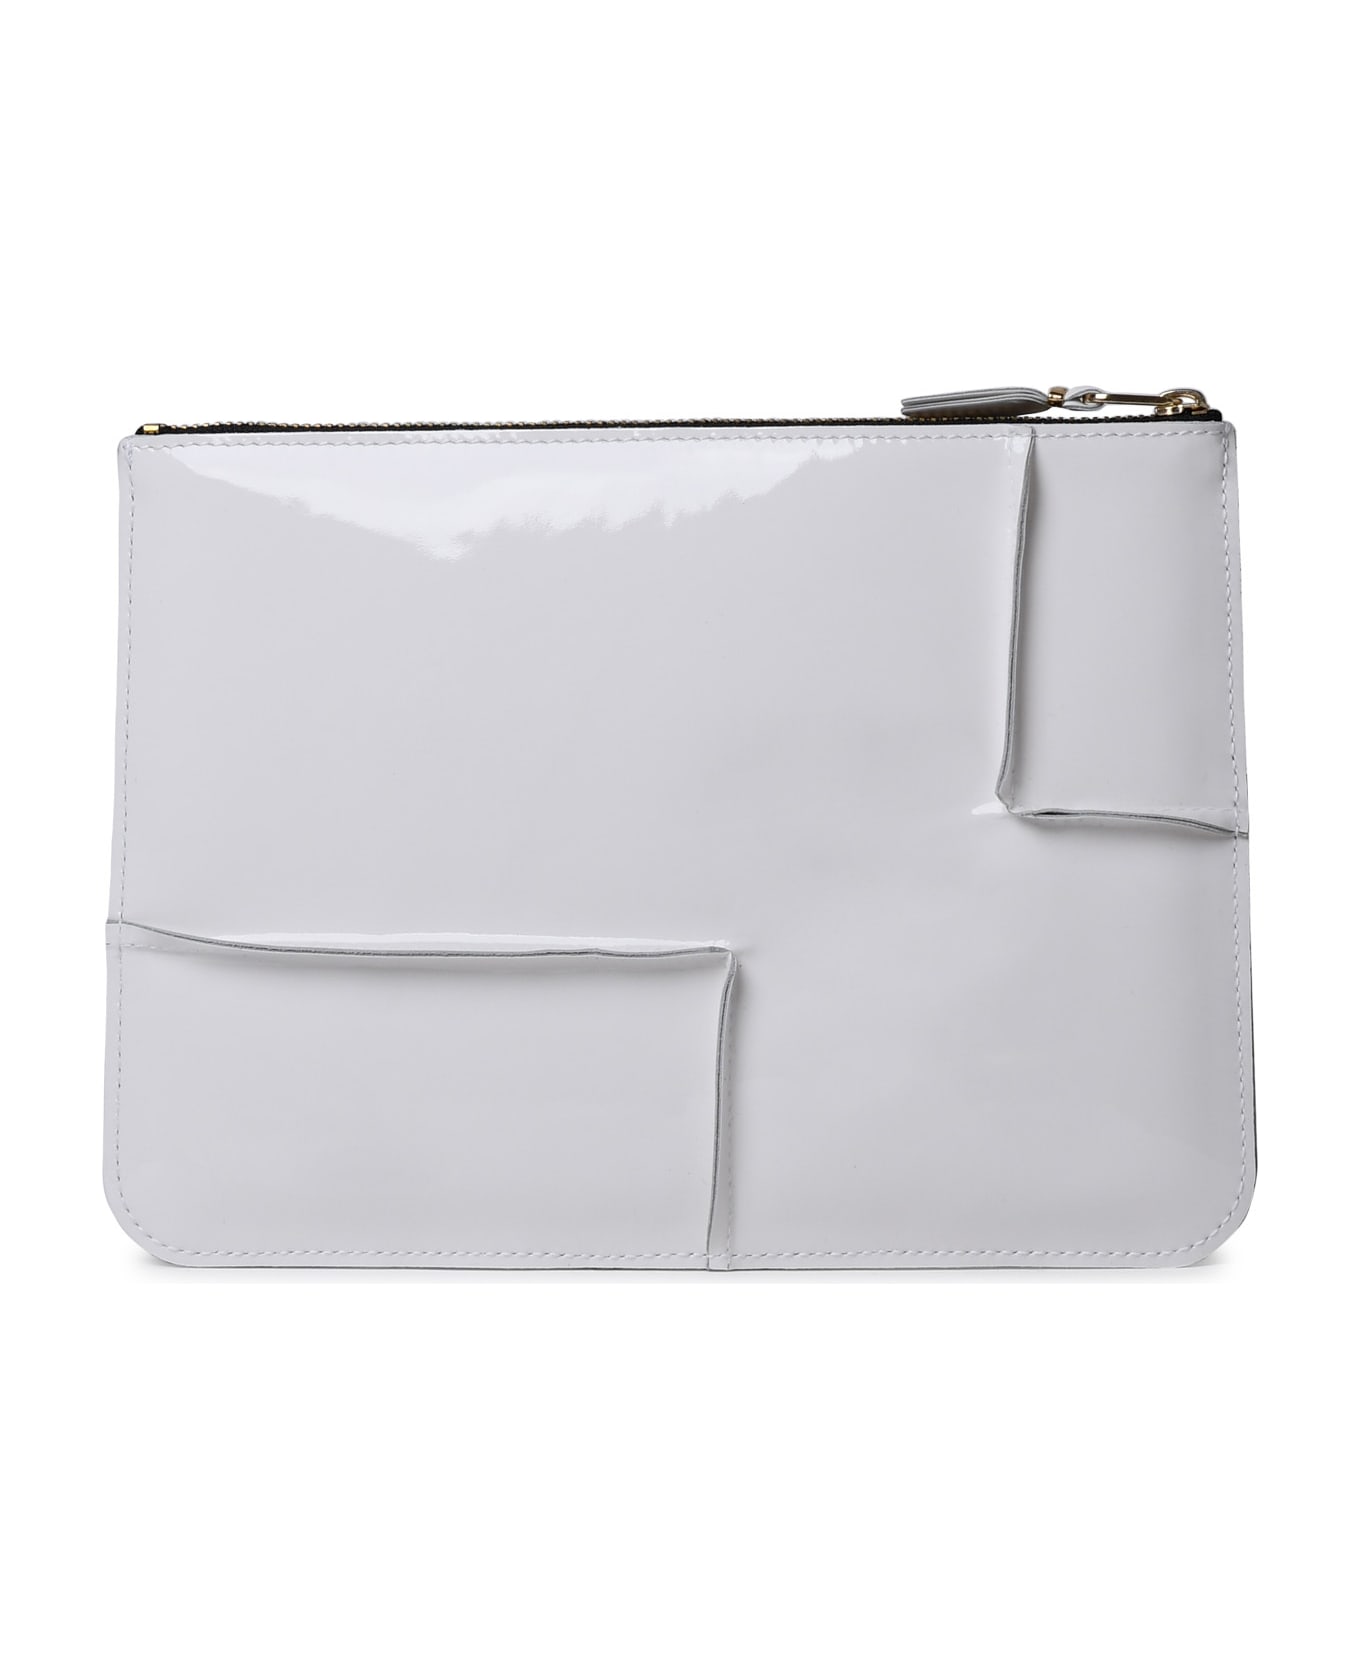 Comme des Garçons Wallet 'medley' White Leather Packet - White